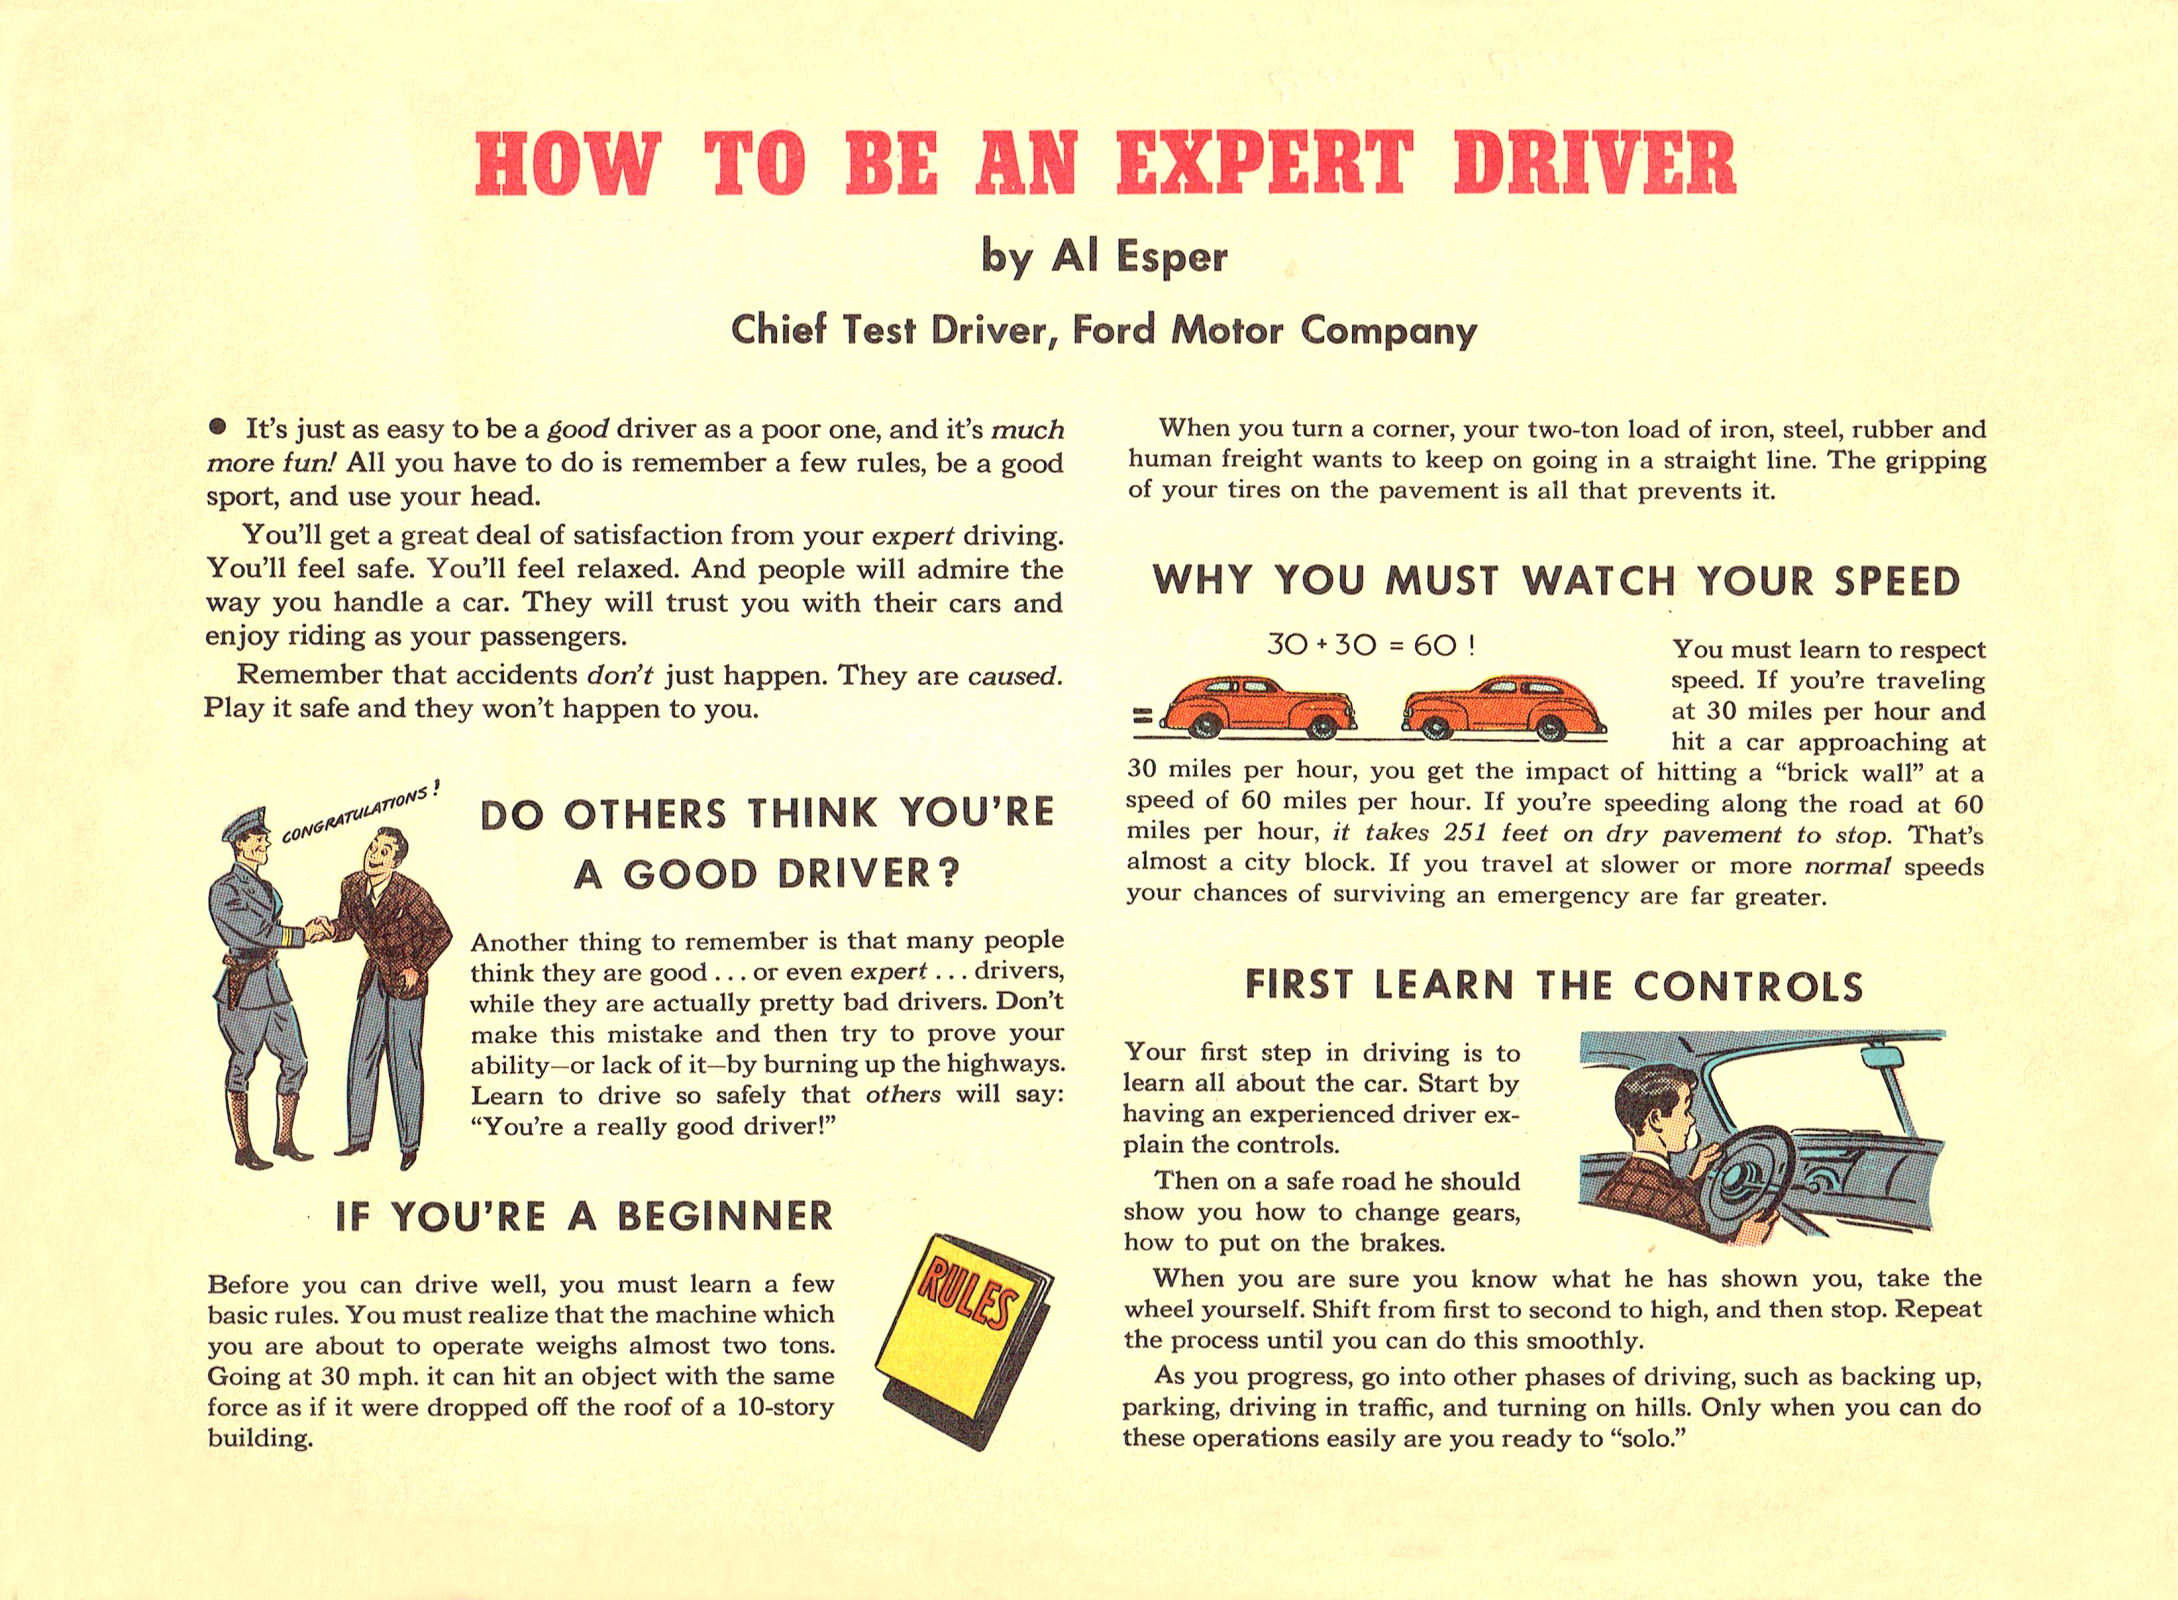 1946 Ford Expert Driver Booklet (TP).pdf-2024-2-10 16.7.18_Page_02